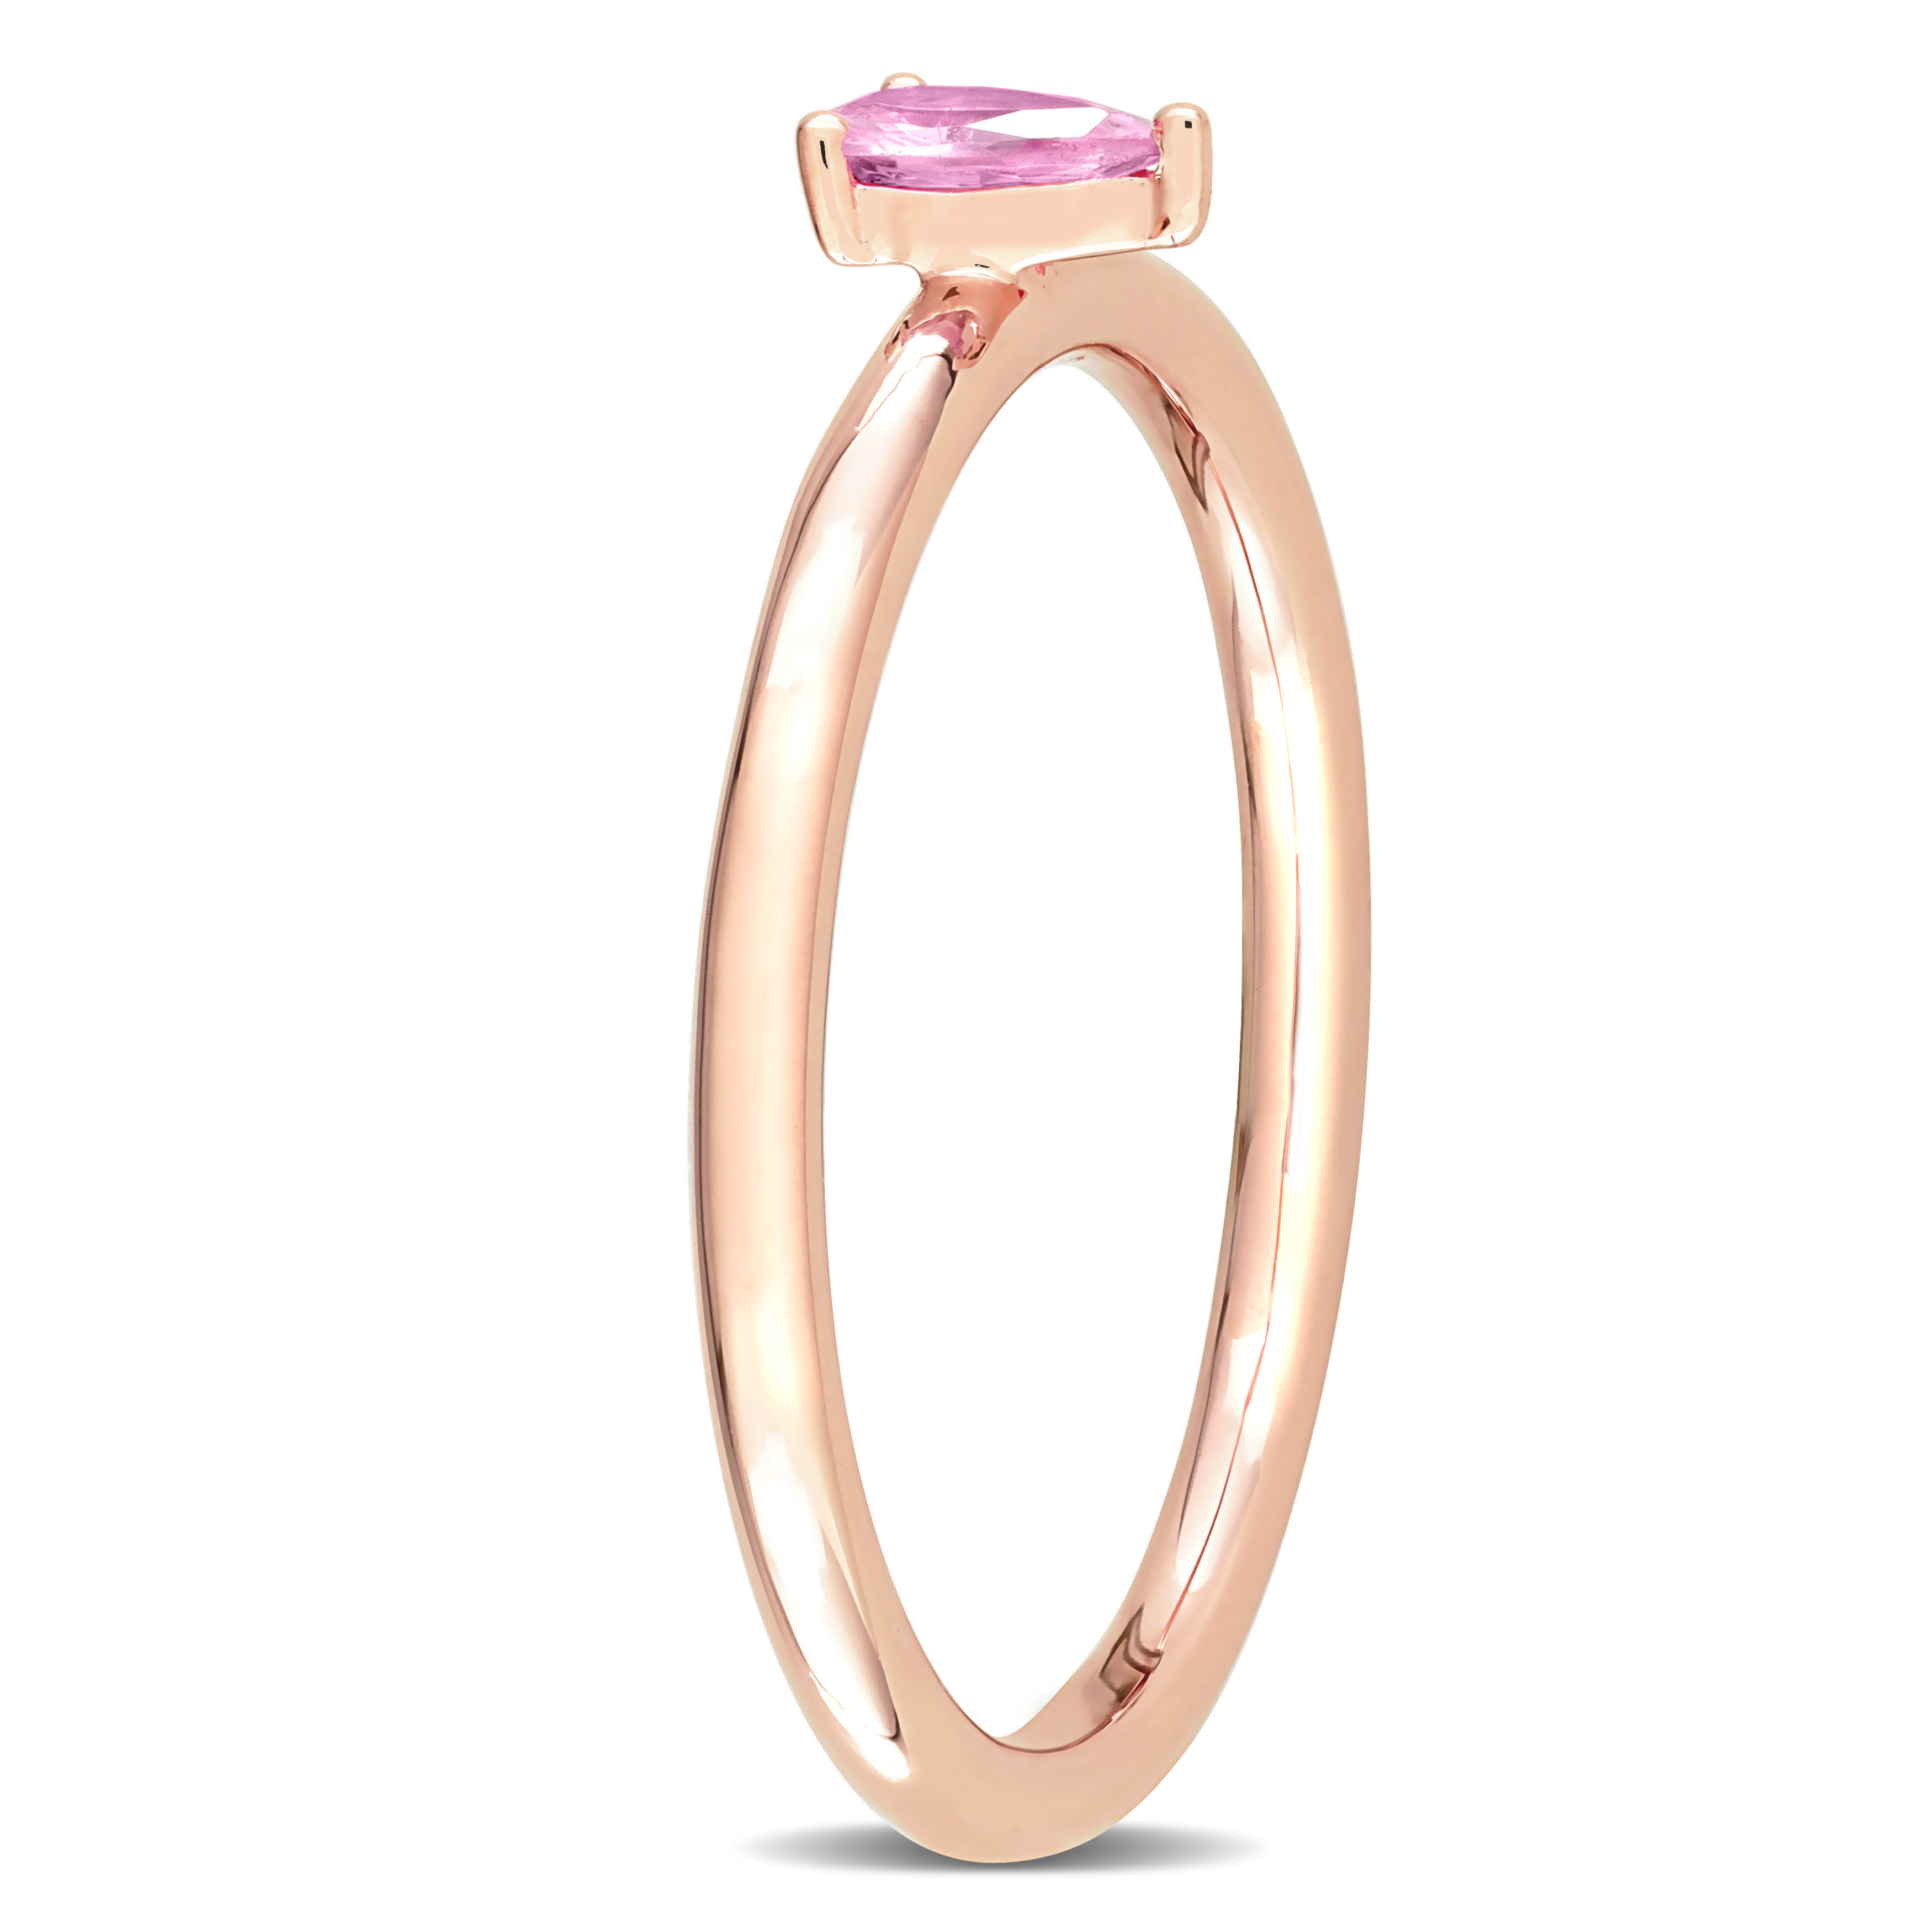 1/4 CT TGW Pear Pink Sapphire Stackable Ring in 10k Rose Gold